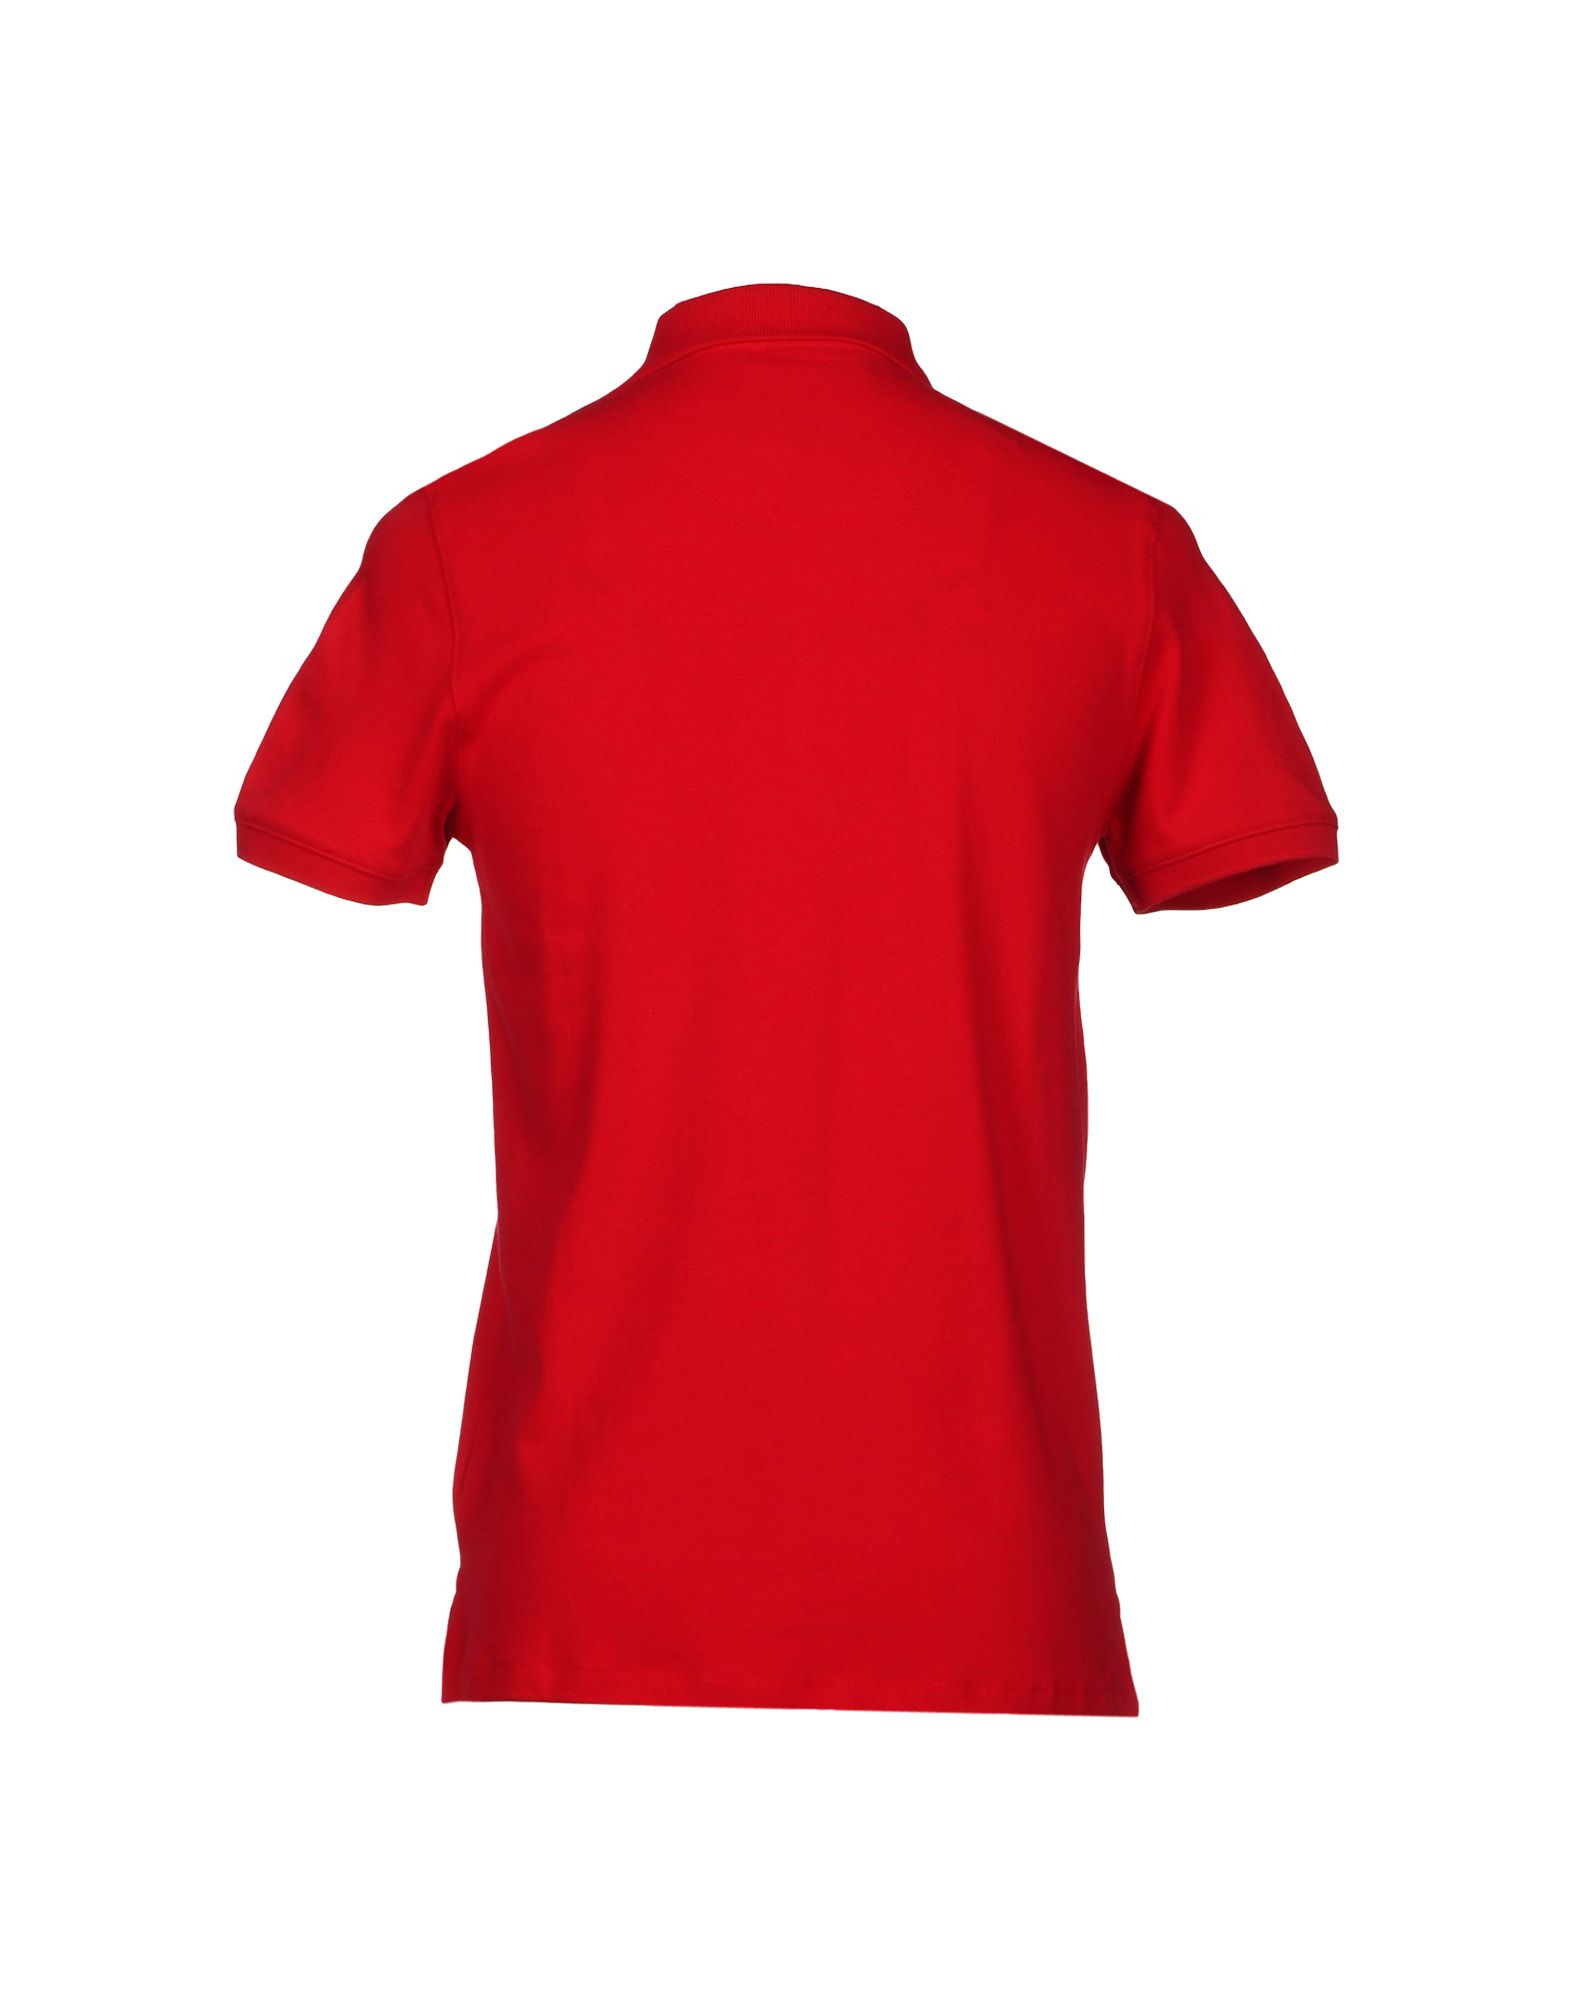 Lyst - Beverly Hills Polo Club Polo Shirt in Red for Men